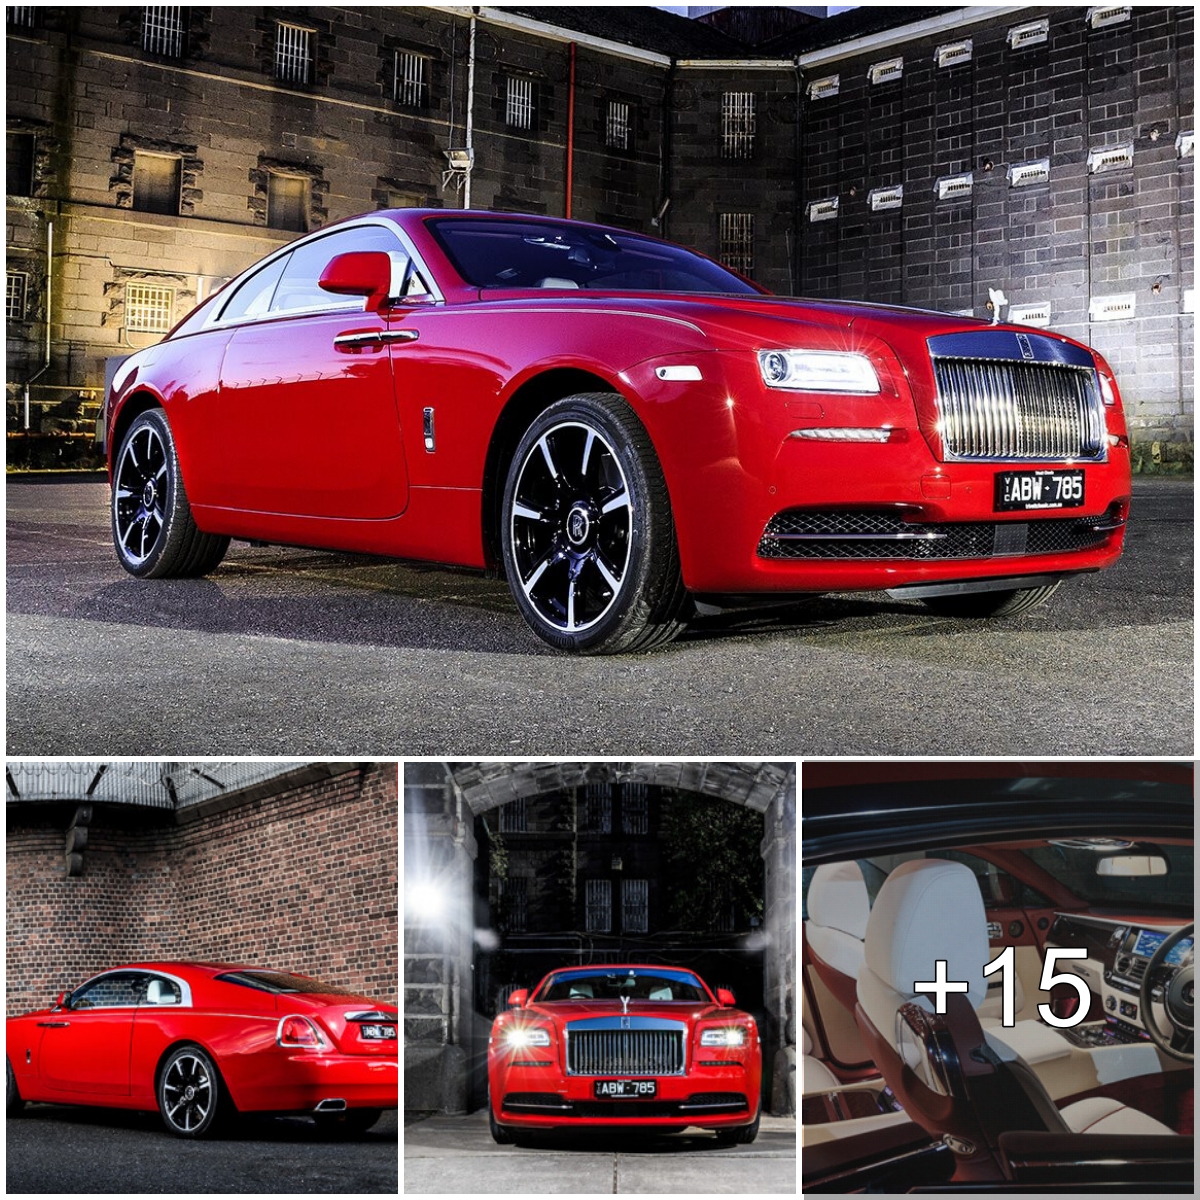 Ghost hunting in the Rolls-Royce Wraith